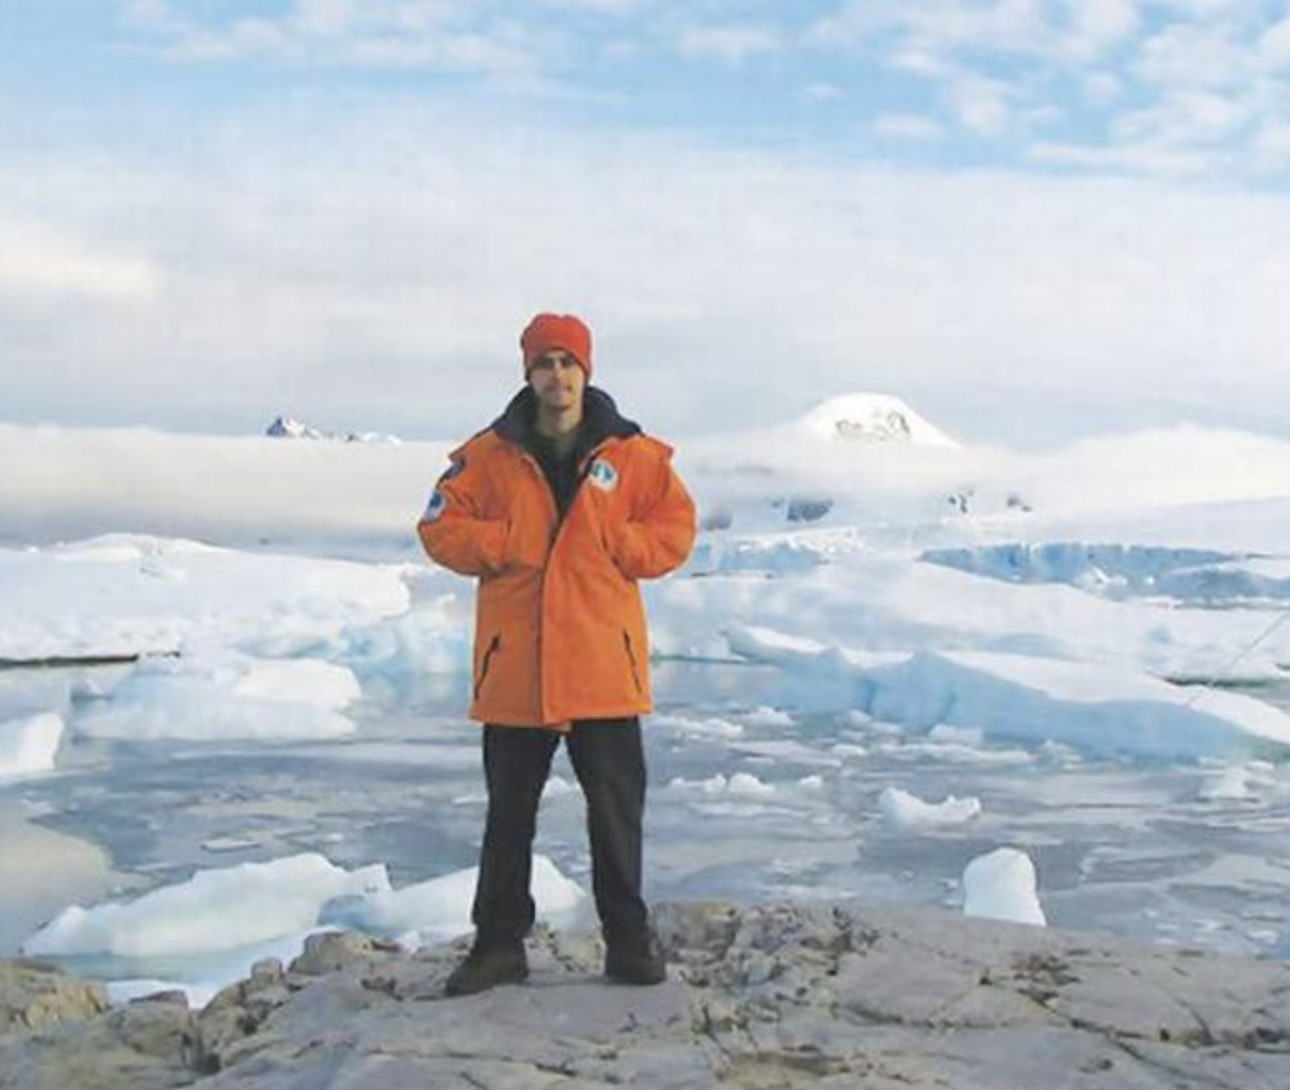 Emilio Palma was the first person born on Antarctica in 1978. As such, he is the only living person to have been the first born on a continent. 